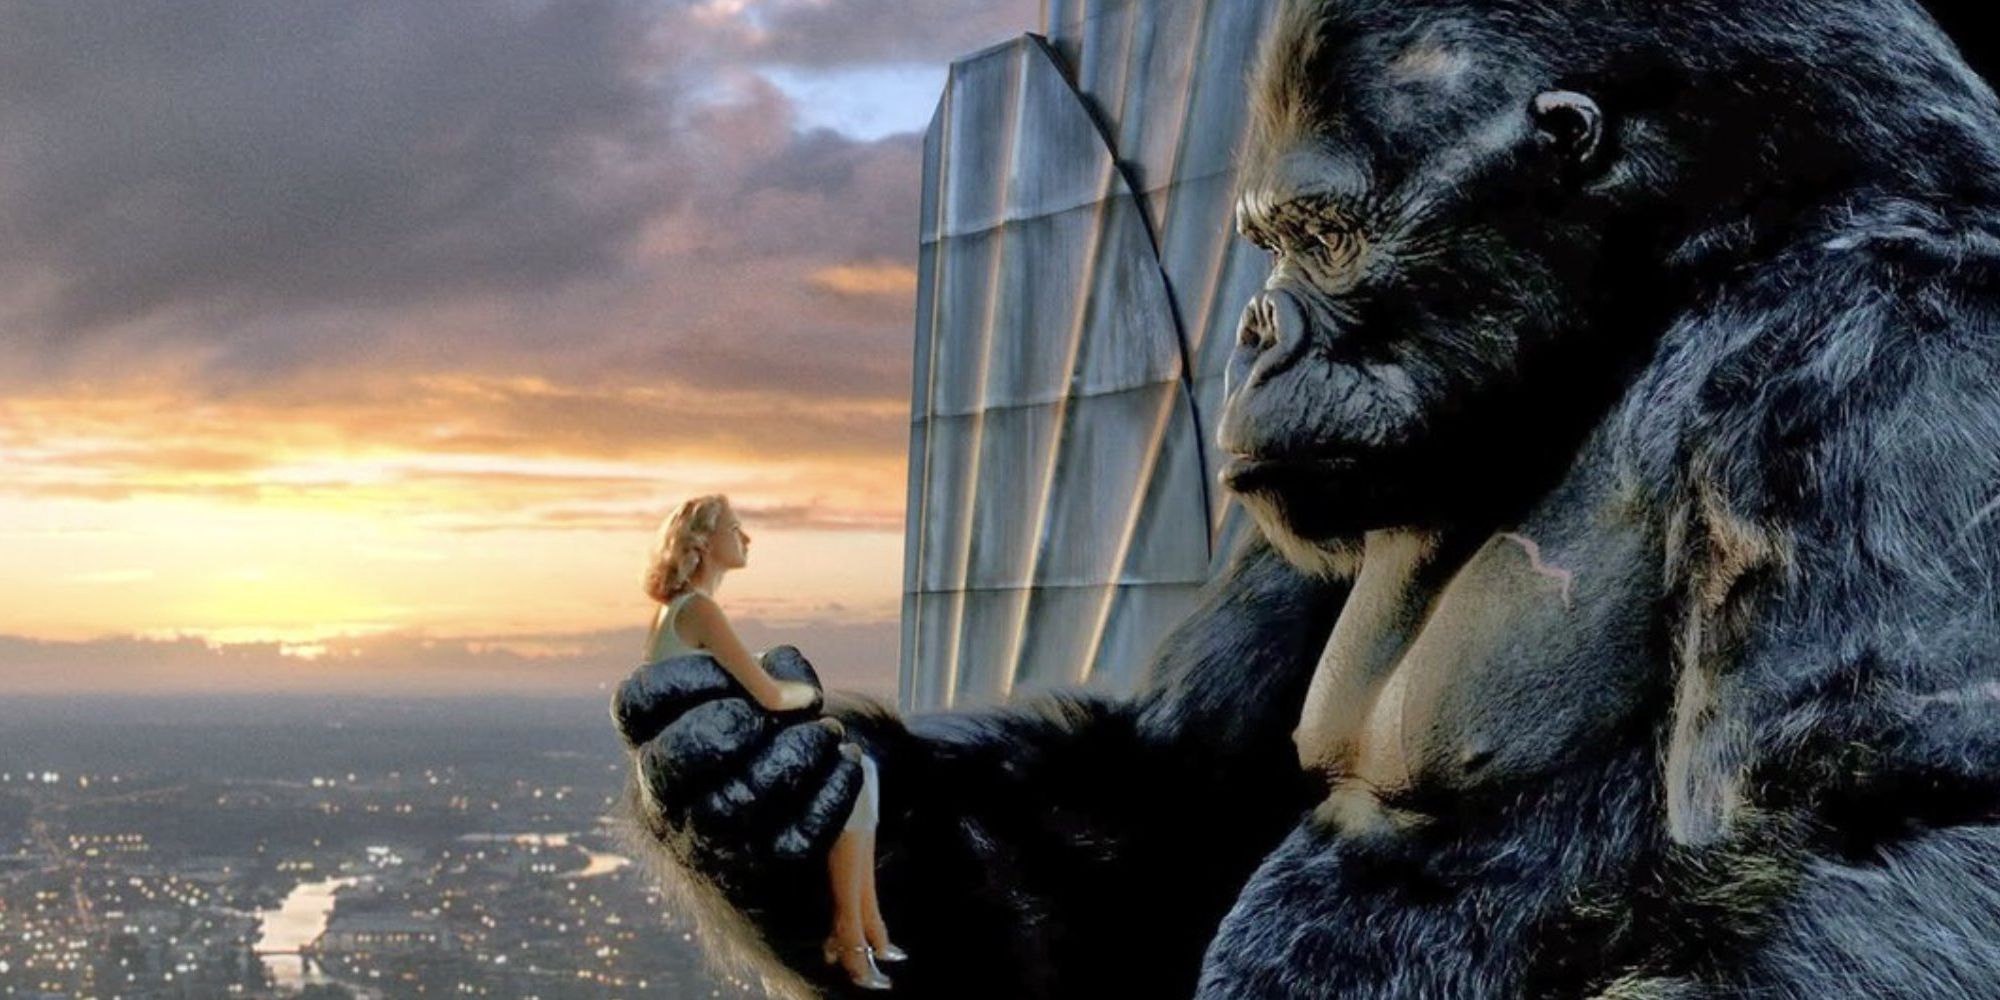 King Kong holding Naomi Watts in his hand over a cityscape